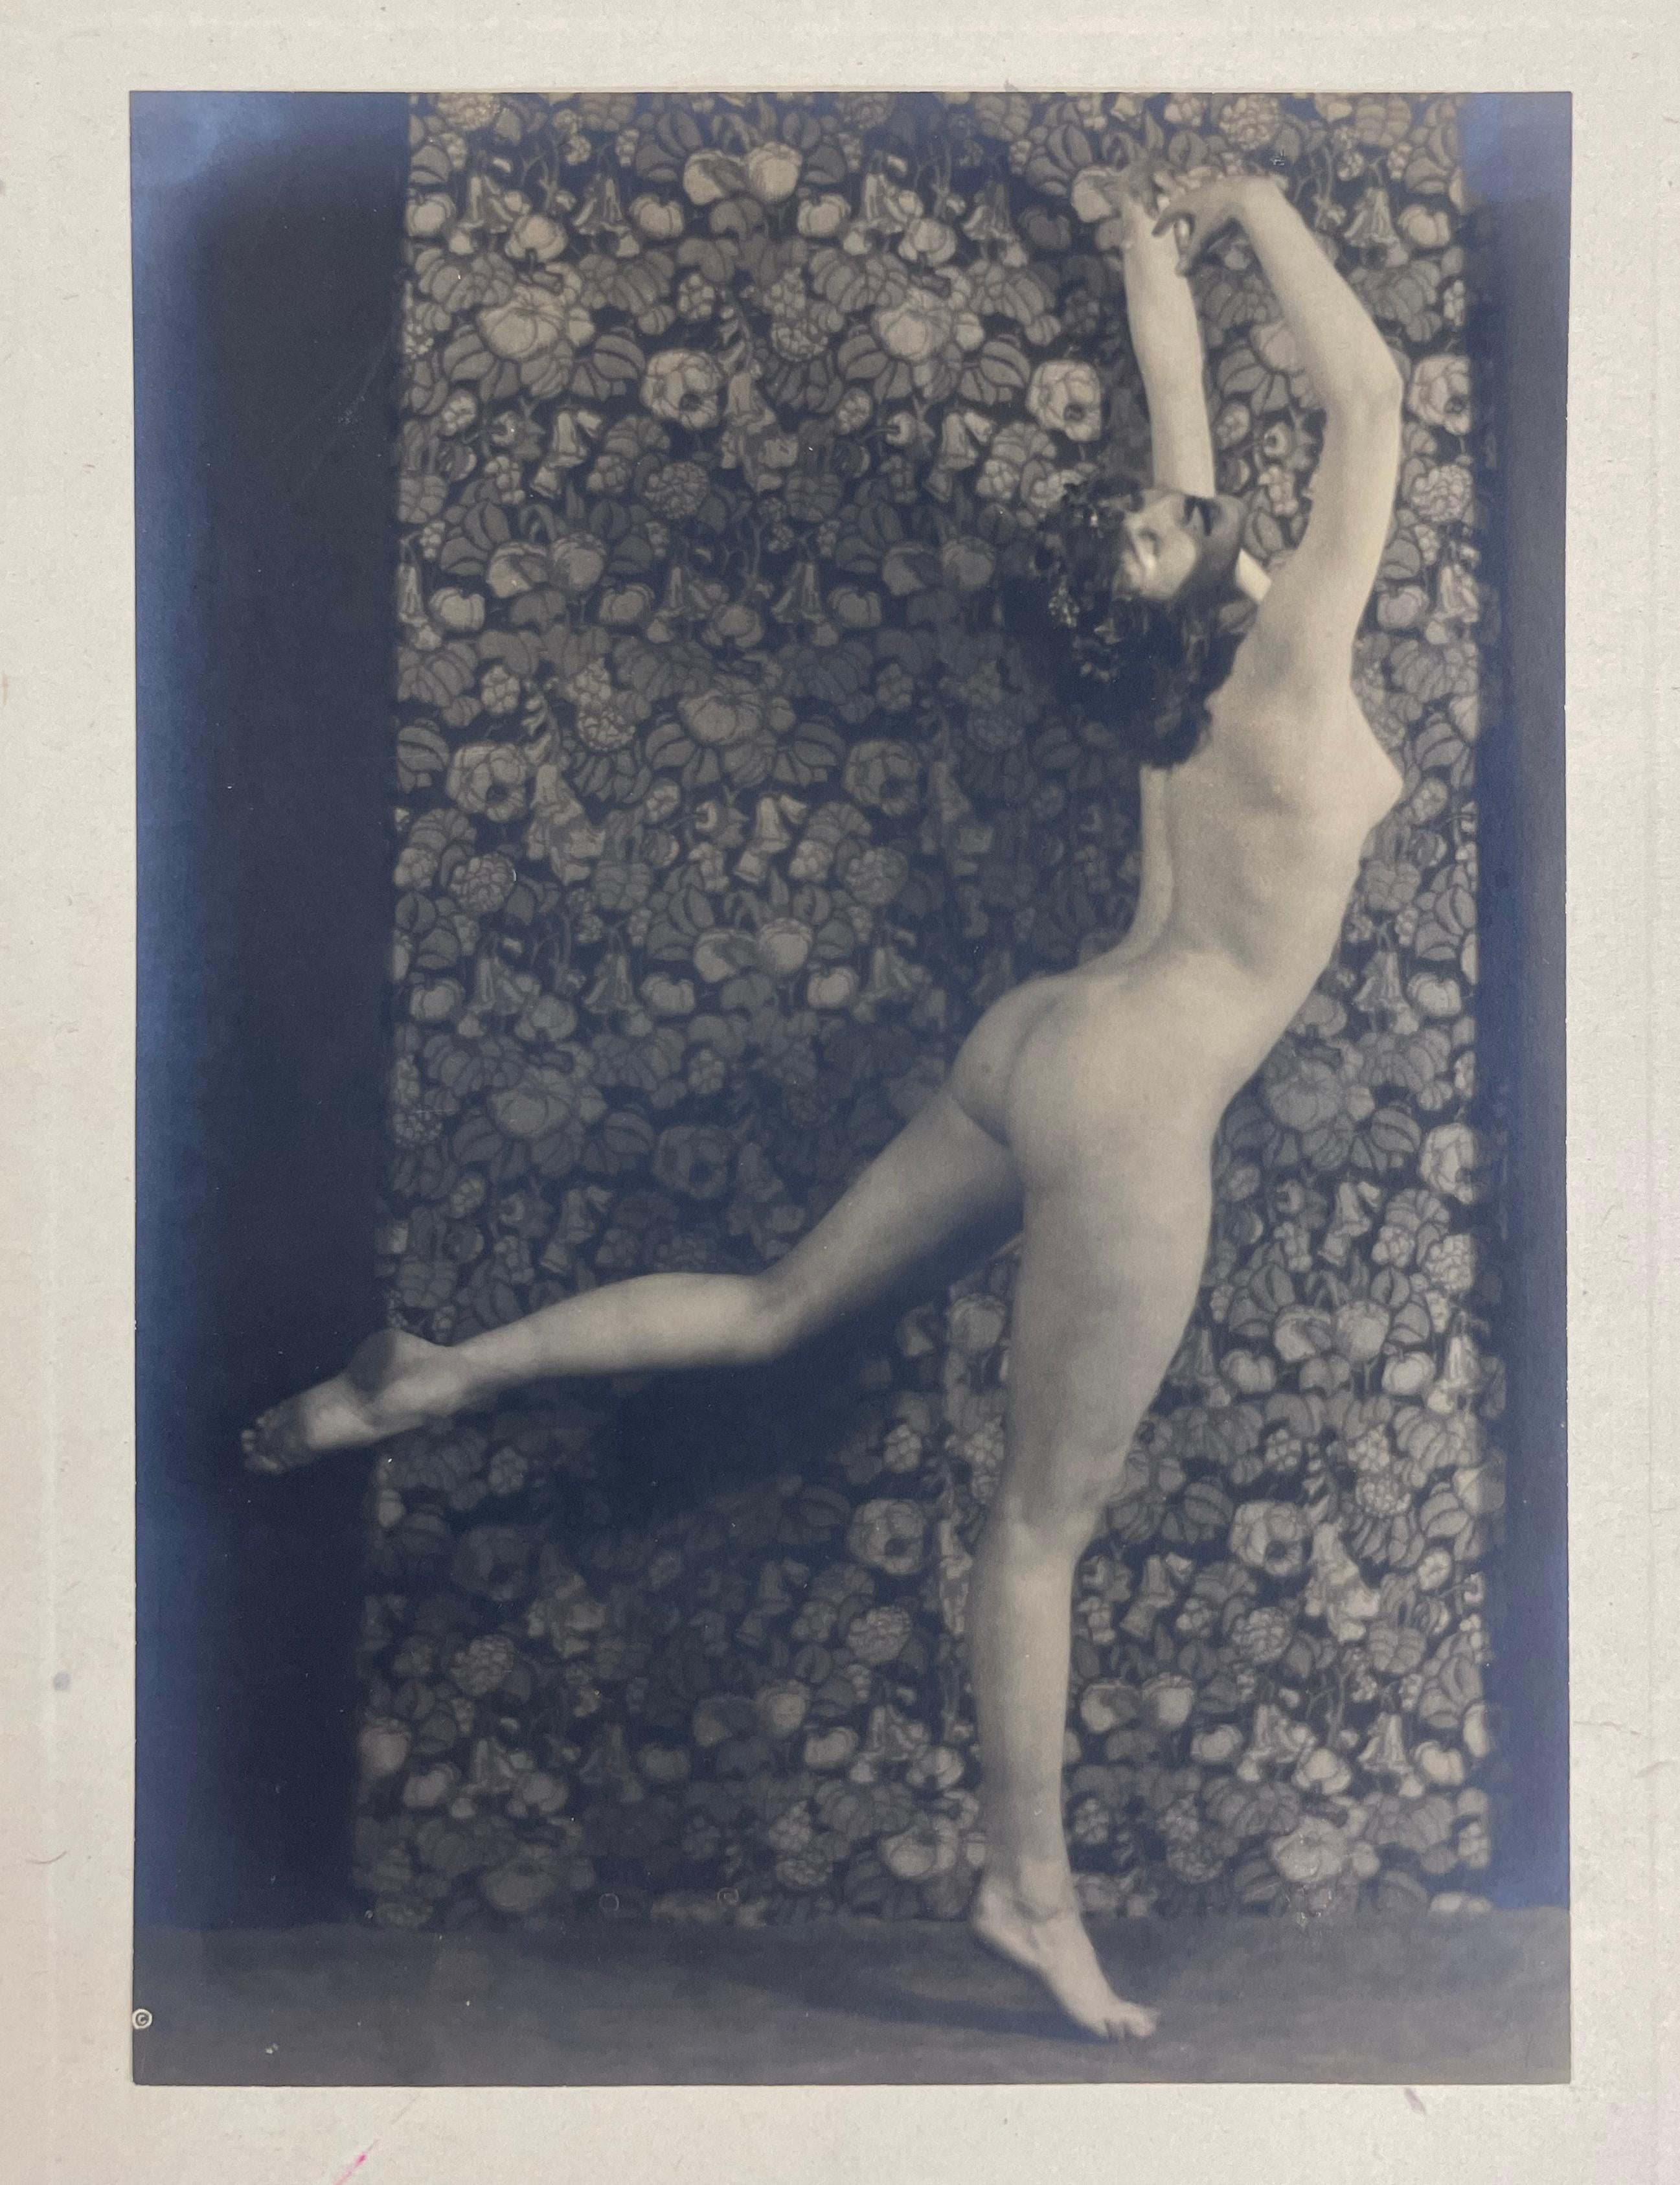 Nude Dancer, from The Female Figure series by Karl Struss features a nude woman standing on one leg, with her leg lifted in an arabesque position. Her arms are raised above her head as she arches back and turns her head towards the viewer. 

Nude